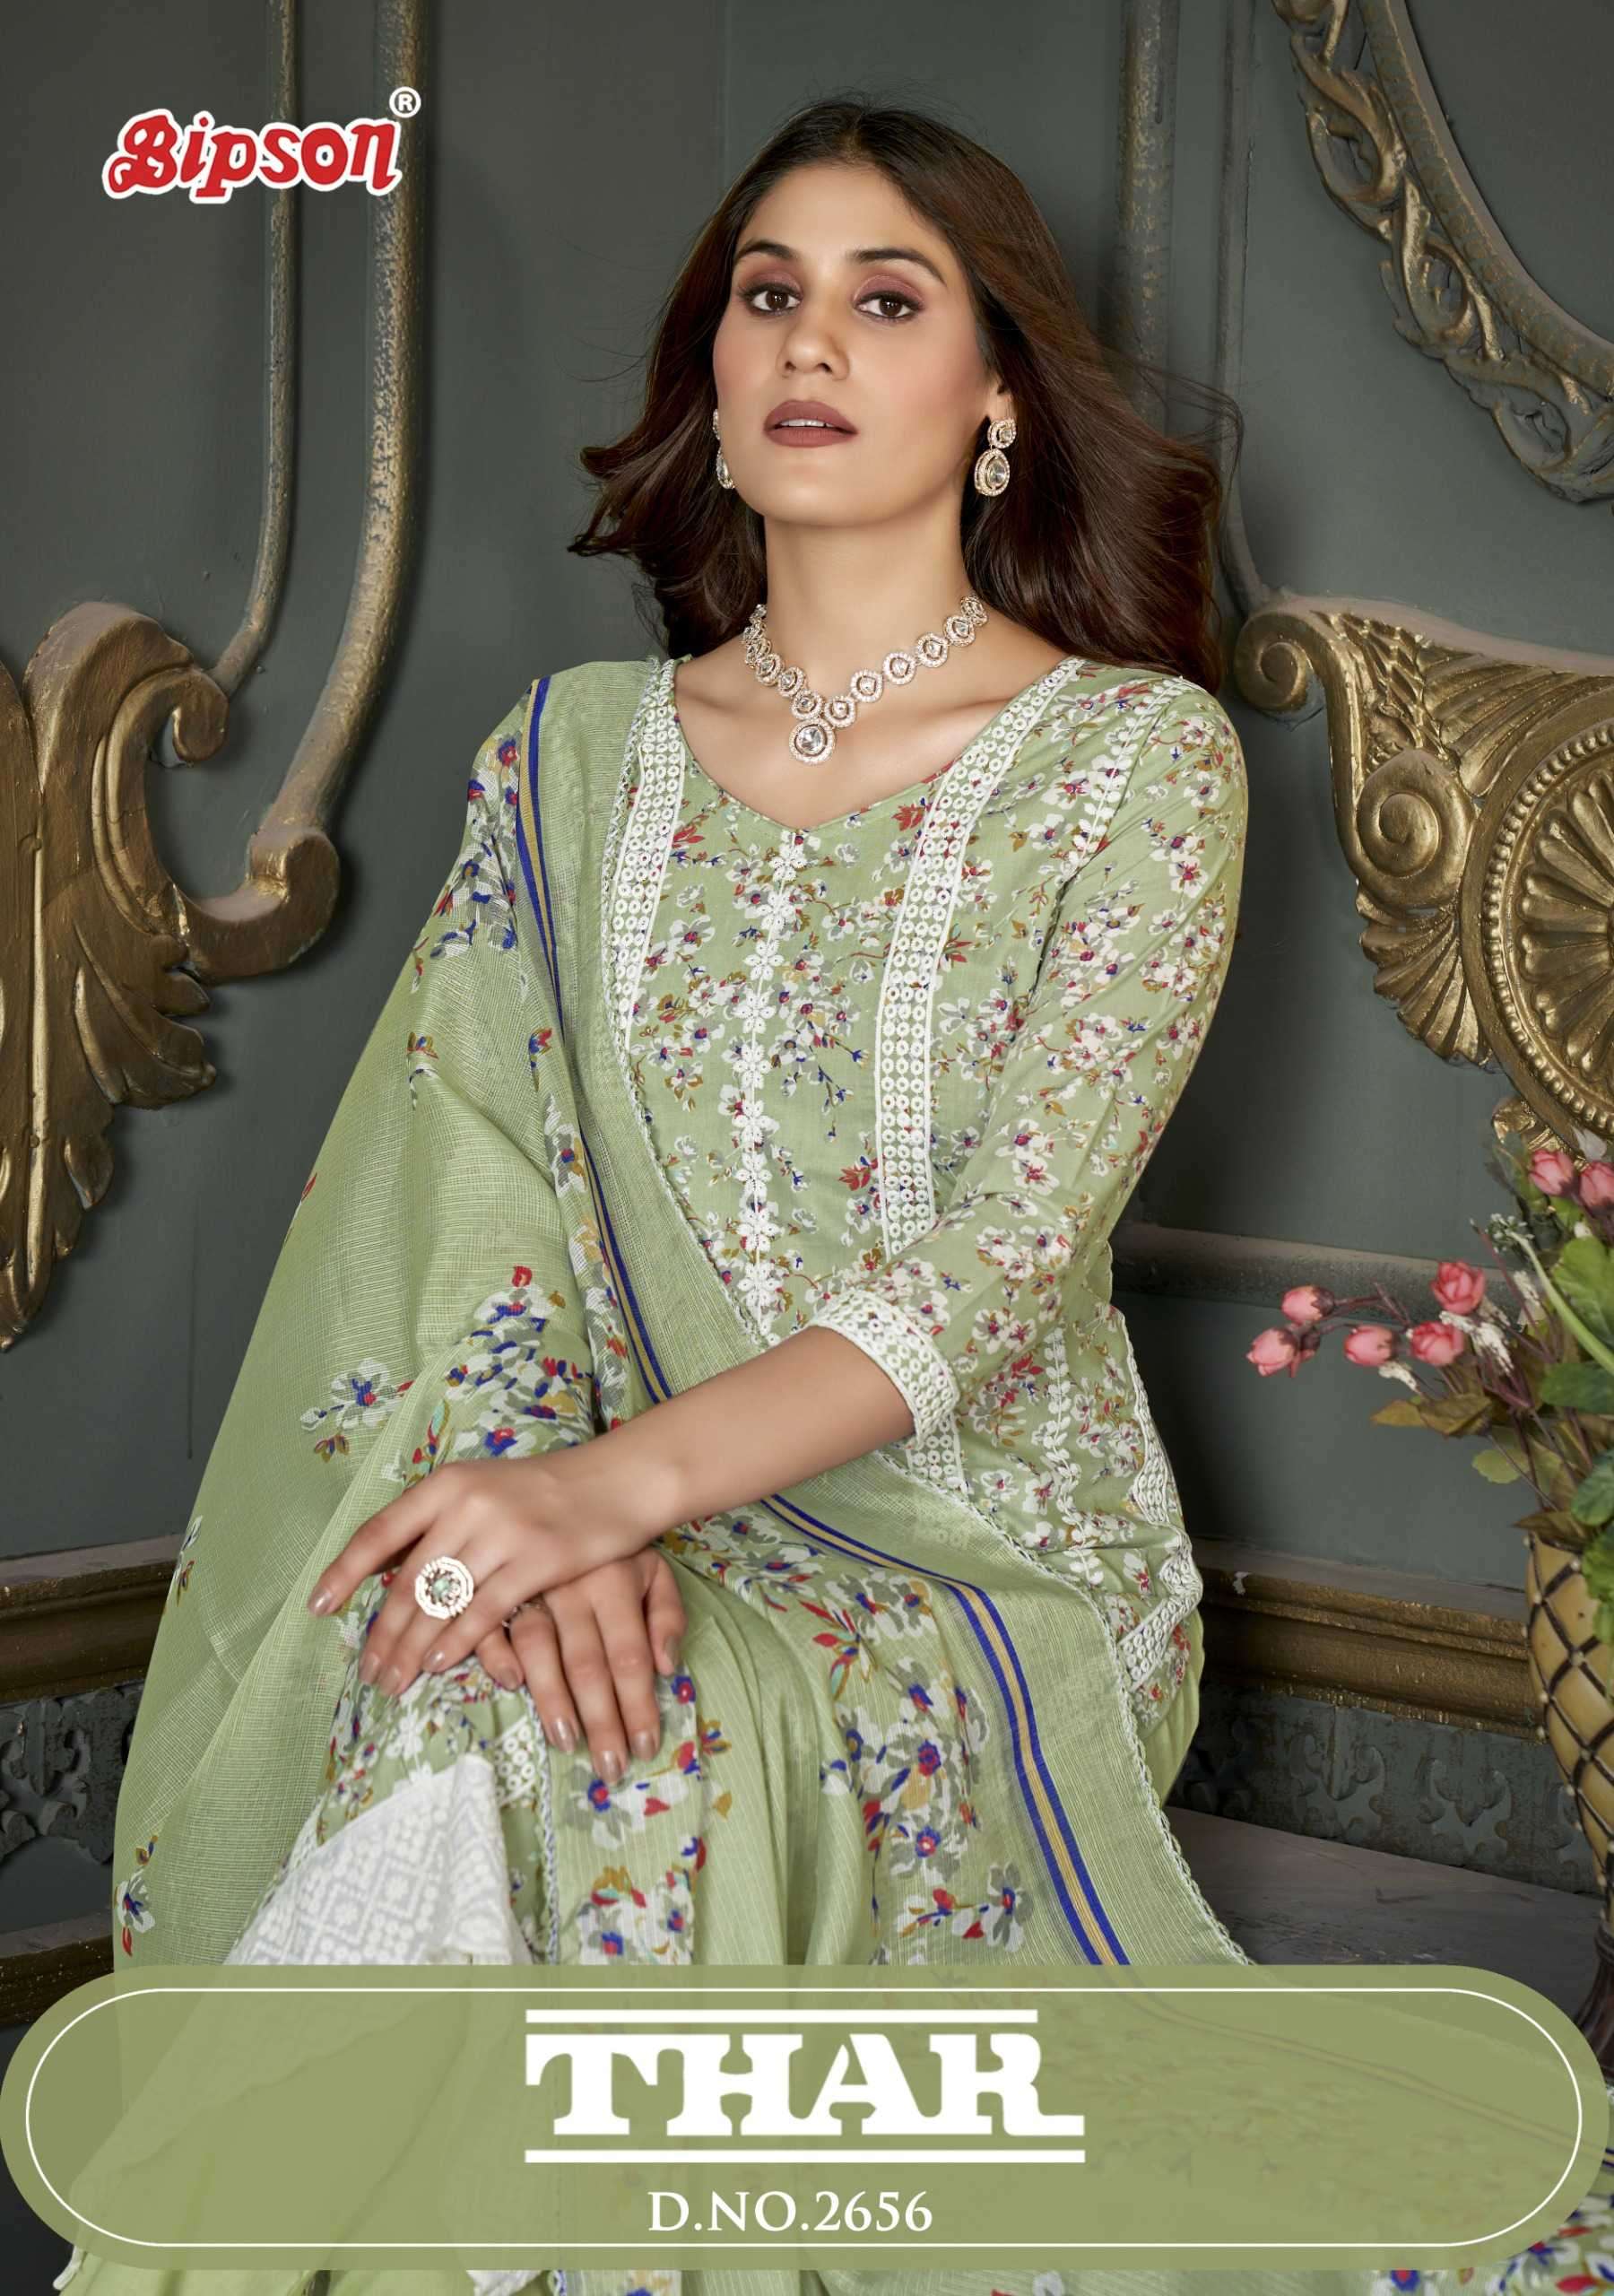 bipson print thar 2656 Pure Cotton Print With White Thread Embroidery Work suit